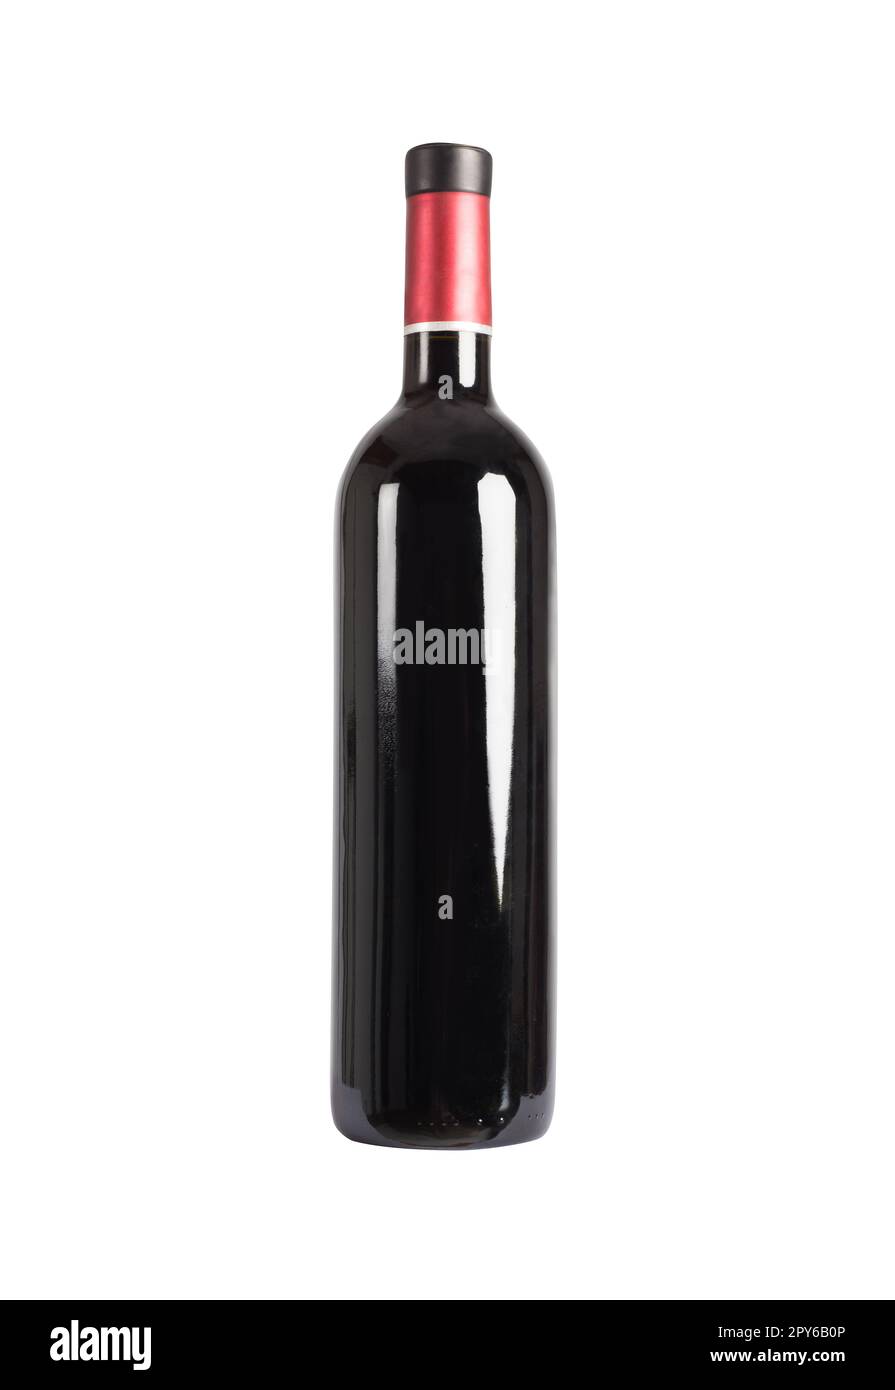 Image of glass red wine bottle without label Stock Photo